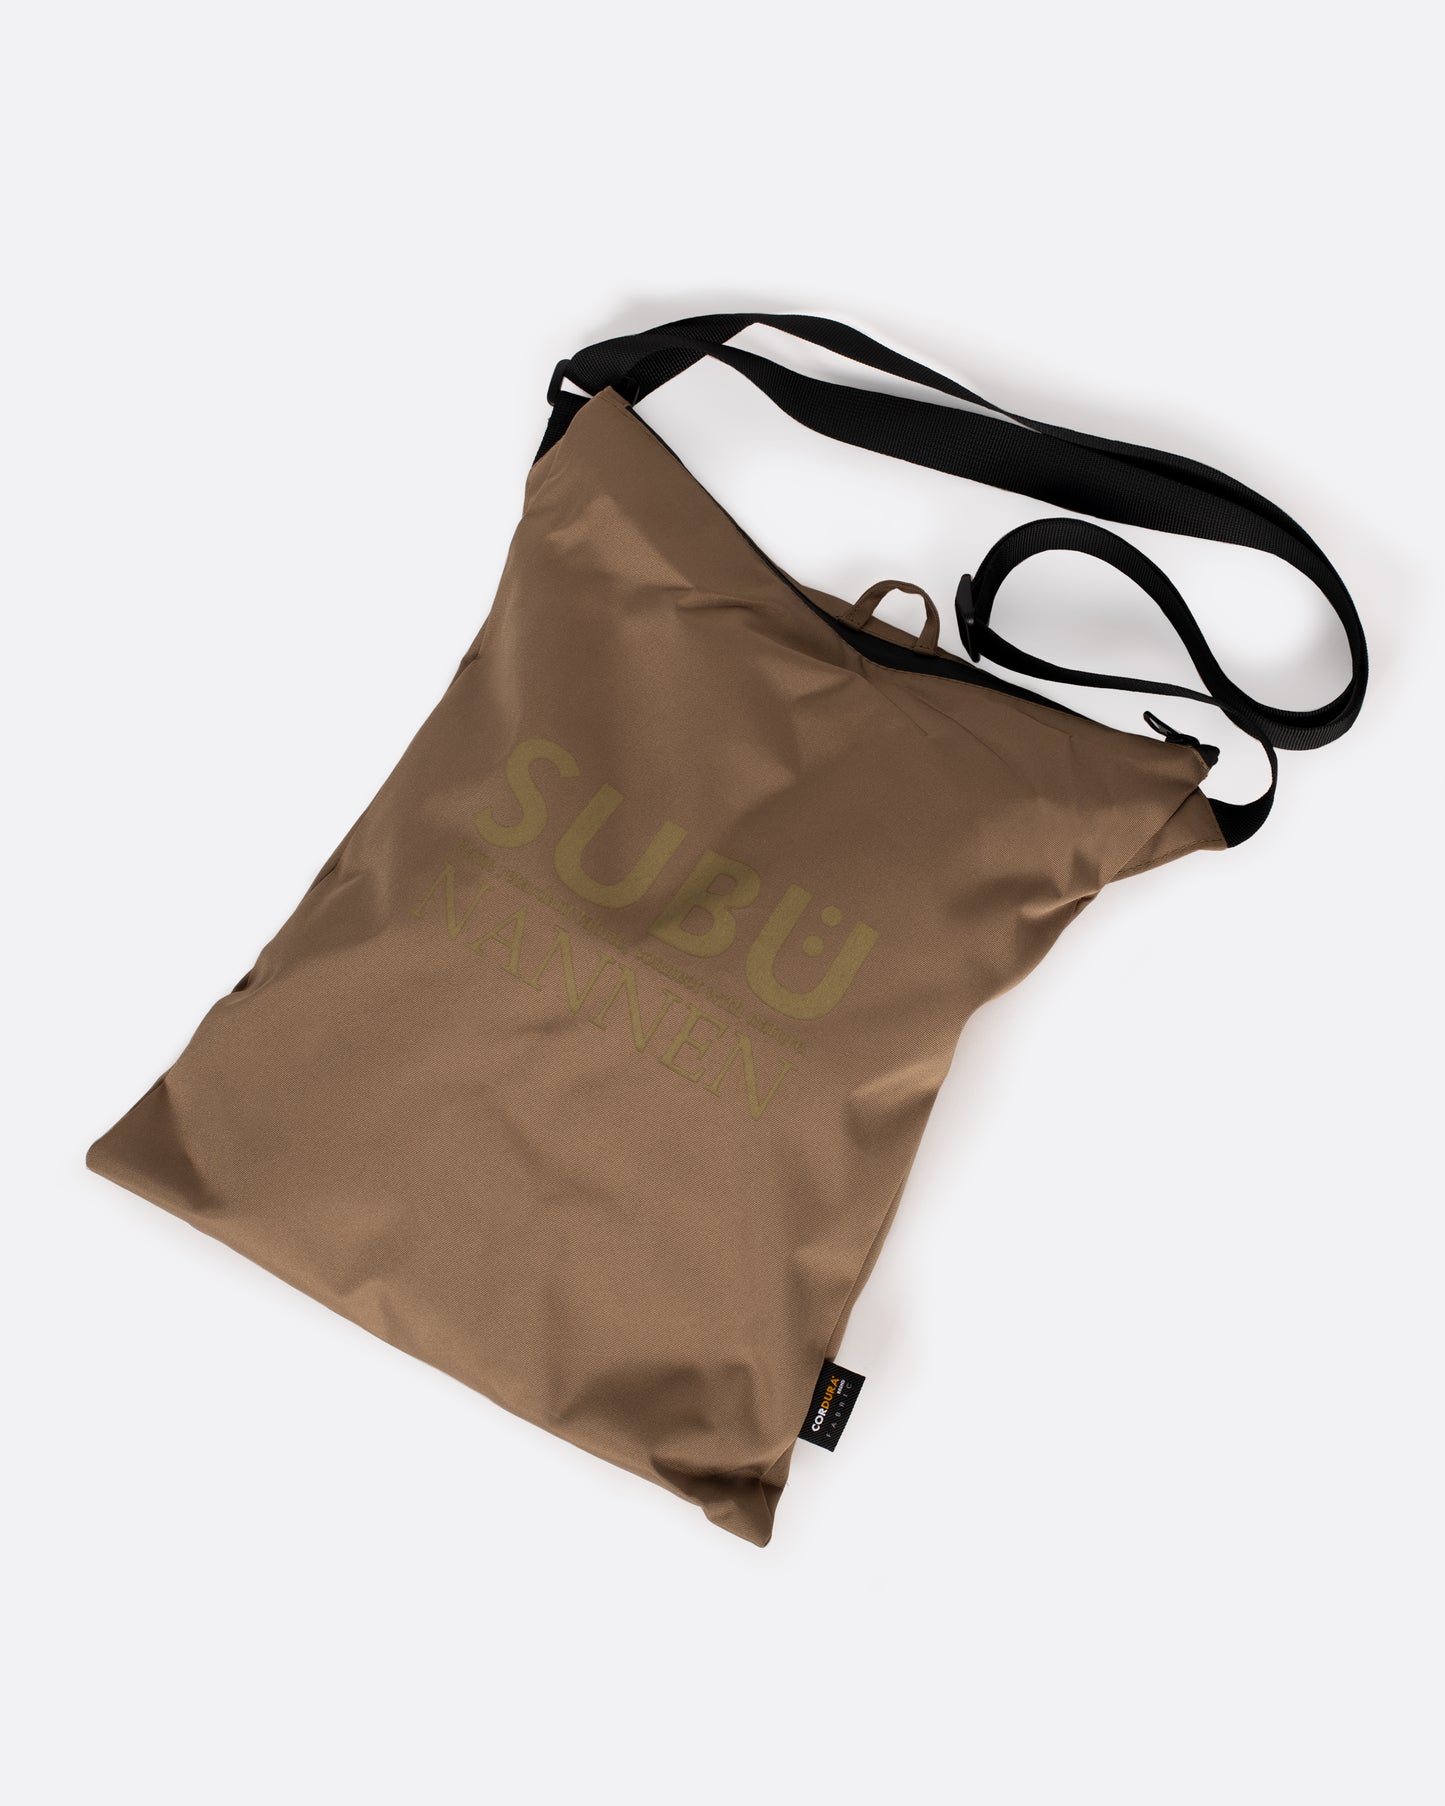 A tan nylon bag with a black strap that is used to carry slippers.